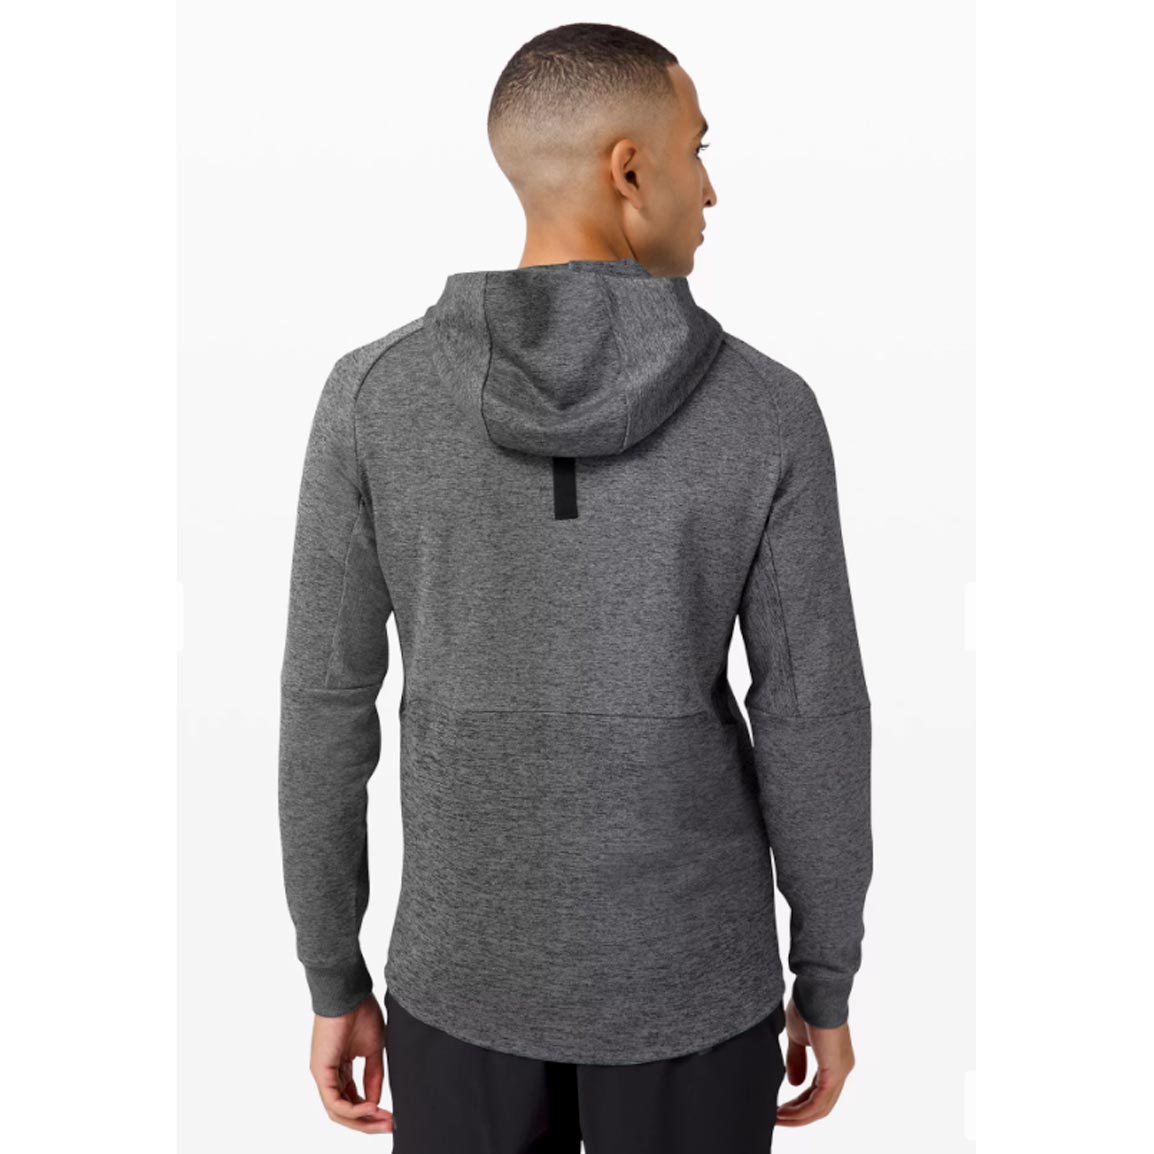 Editor's Picks: 5 stylish hoodies you can actually play golf in